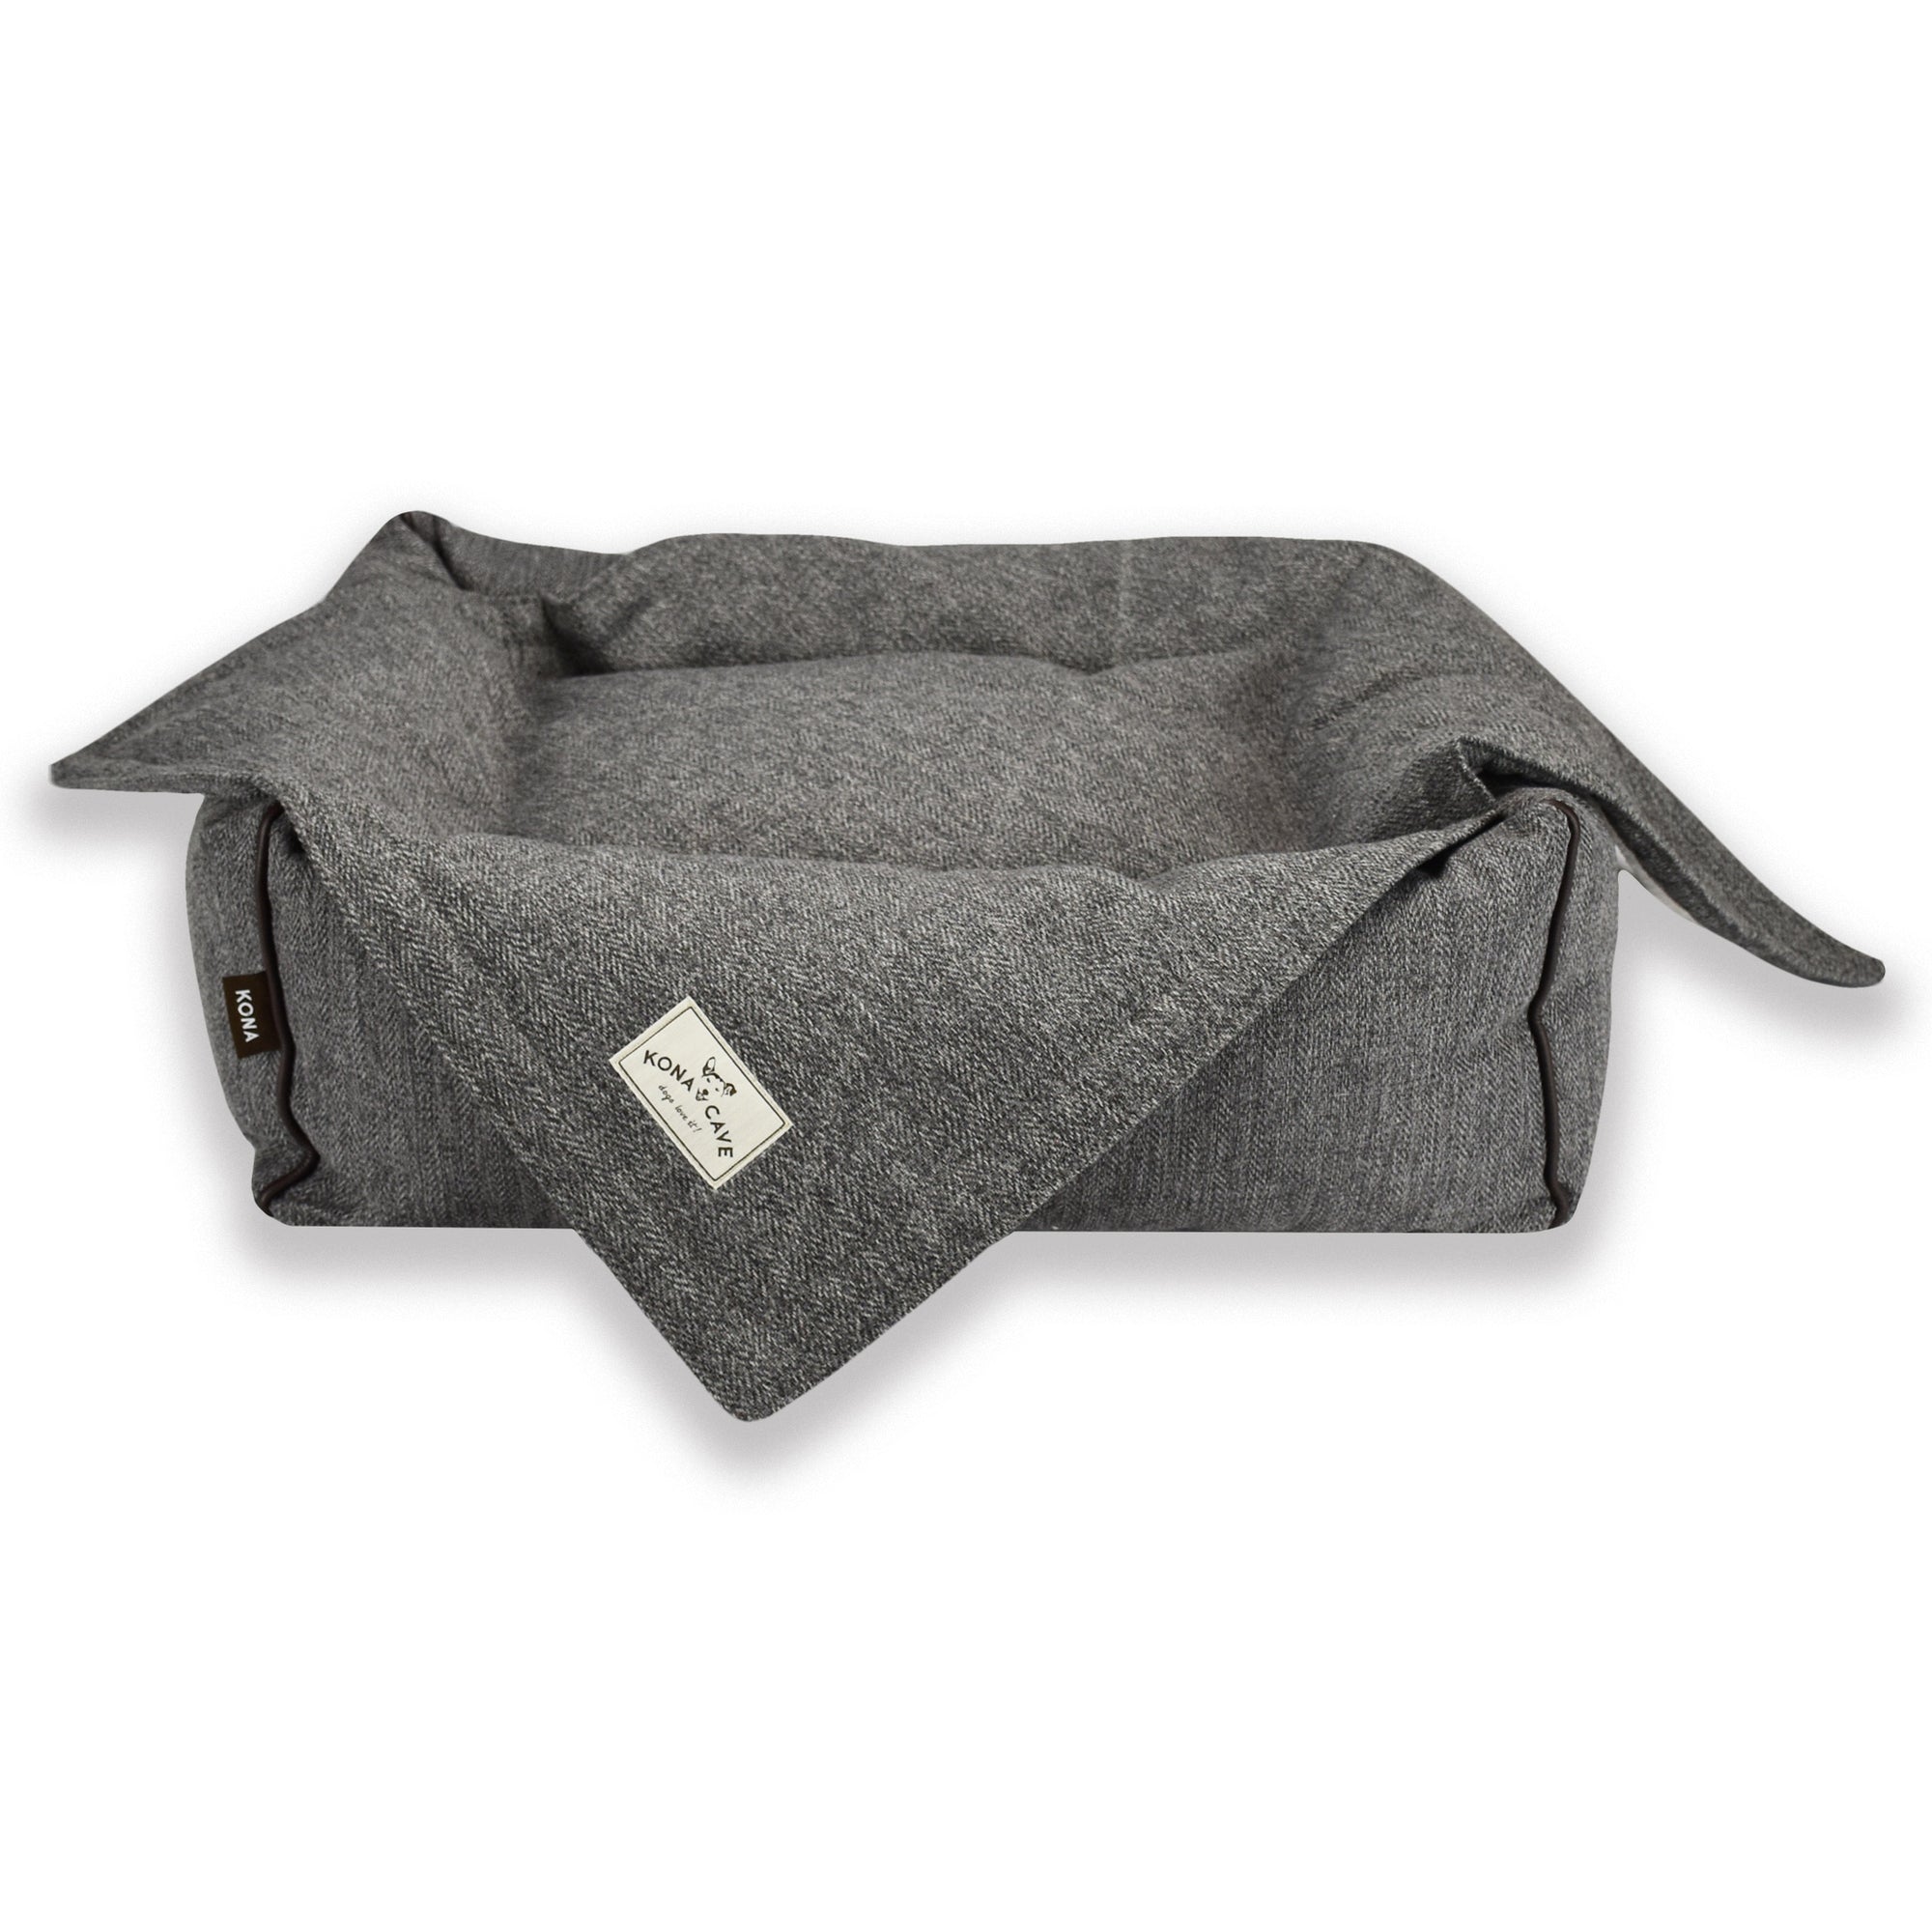 KONA CAVE® Grey Herringbone Pet Blanket and Bolster Bed coordinate perfectly for the style conscious dog and pet parent 